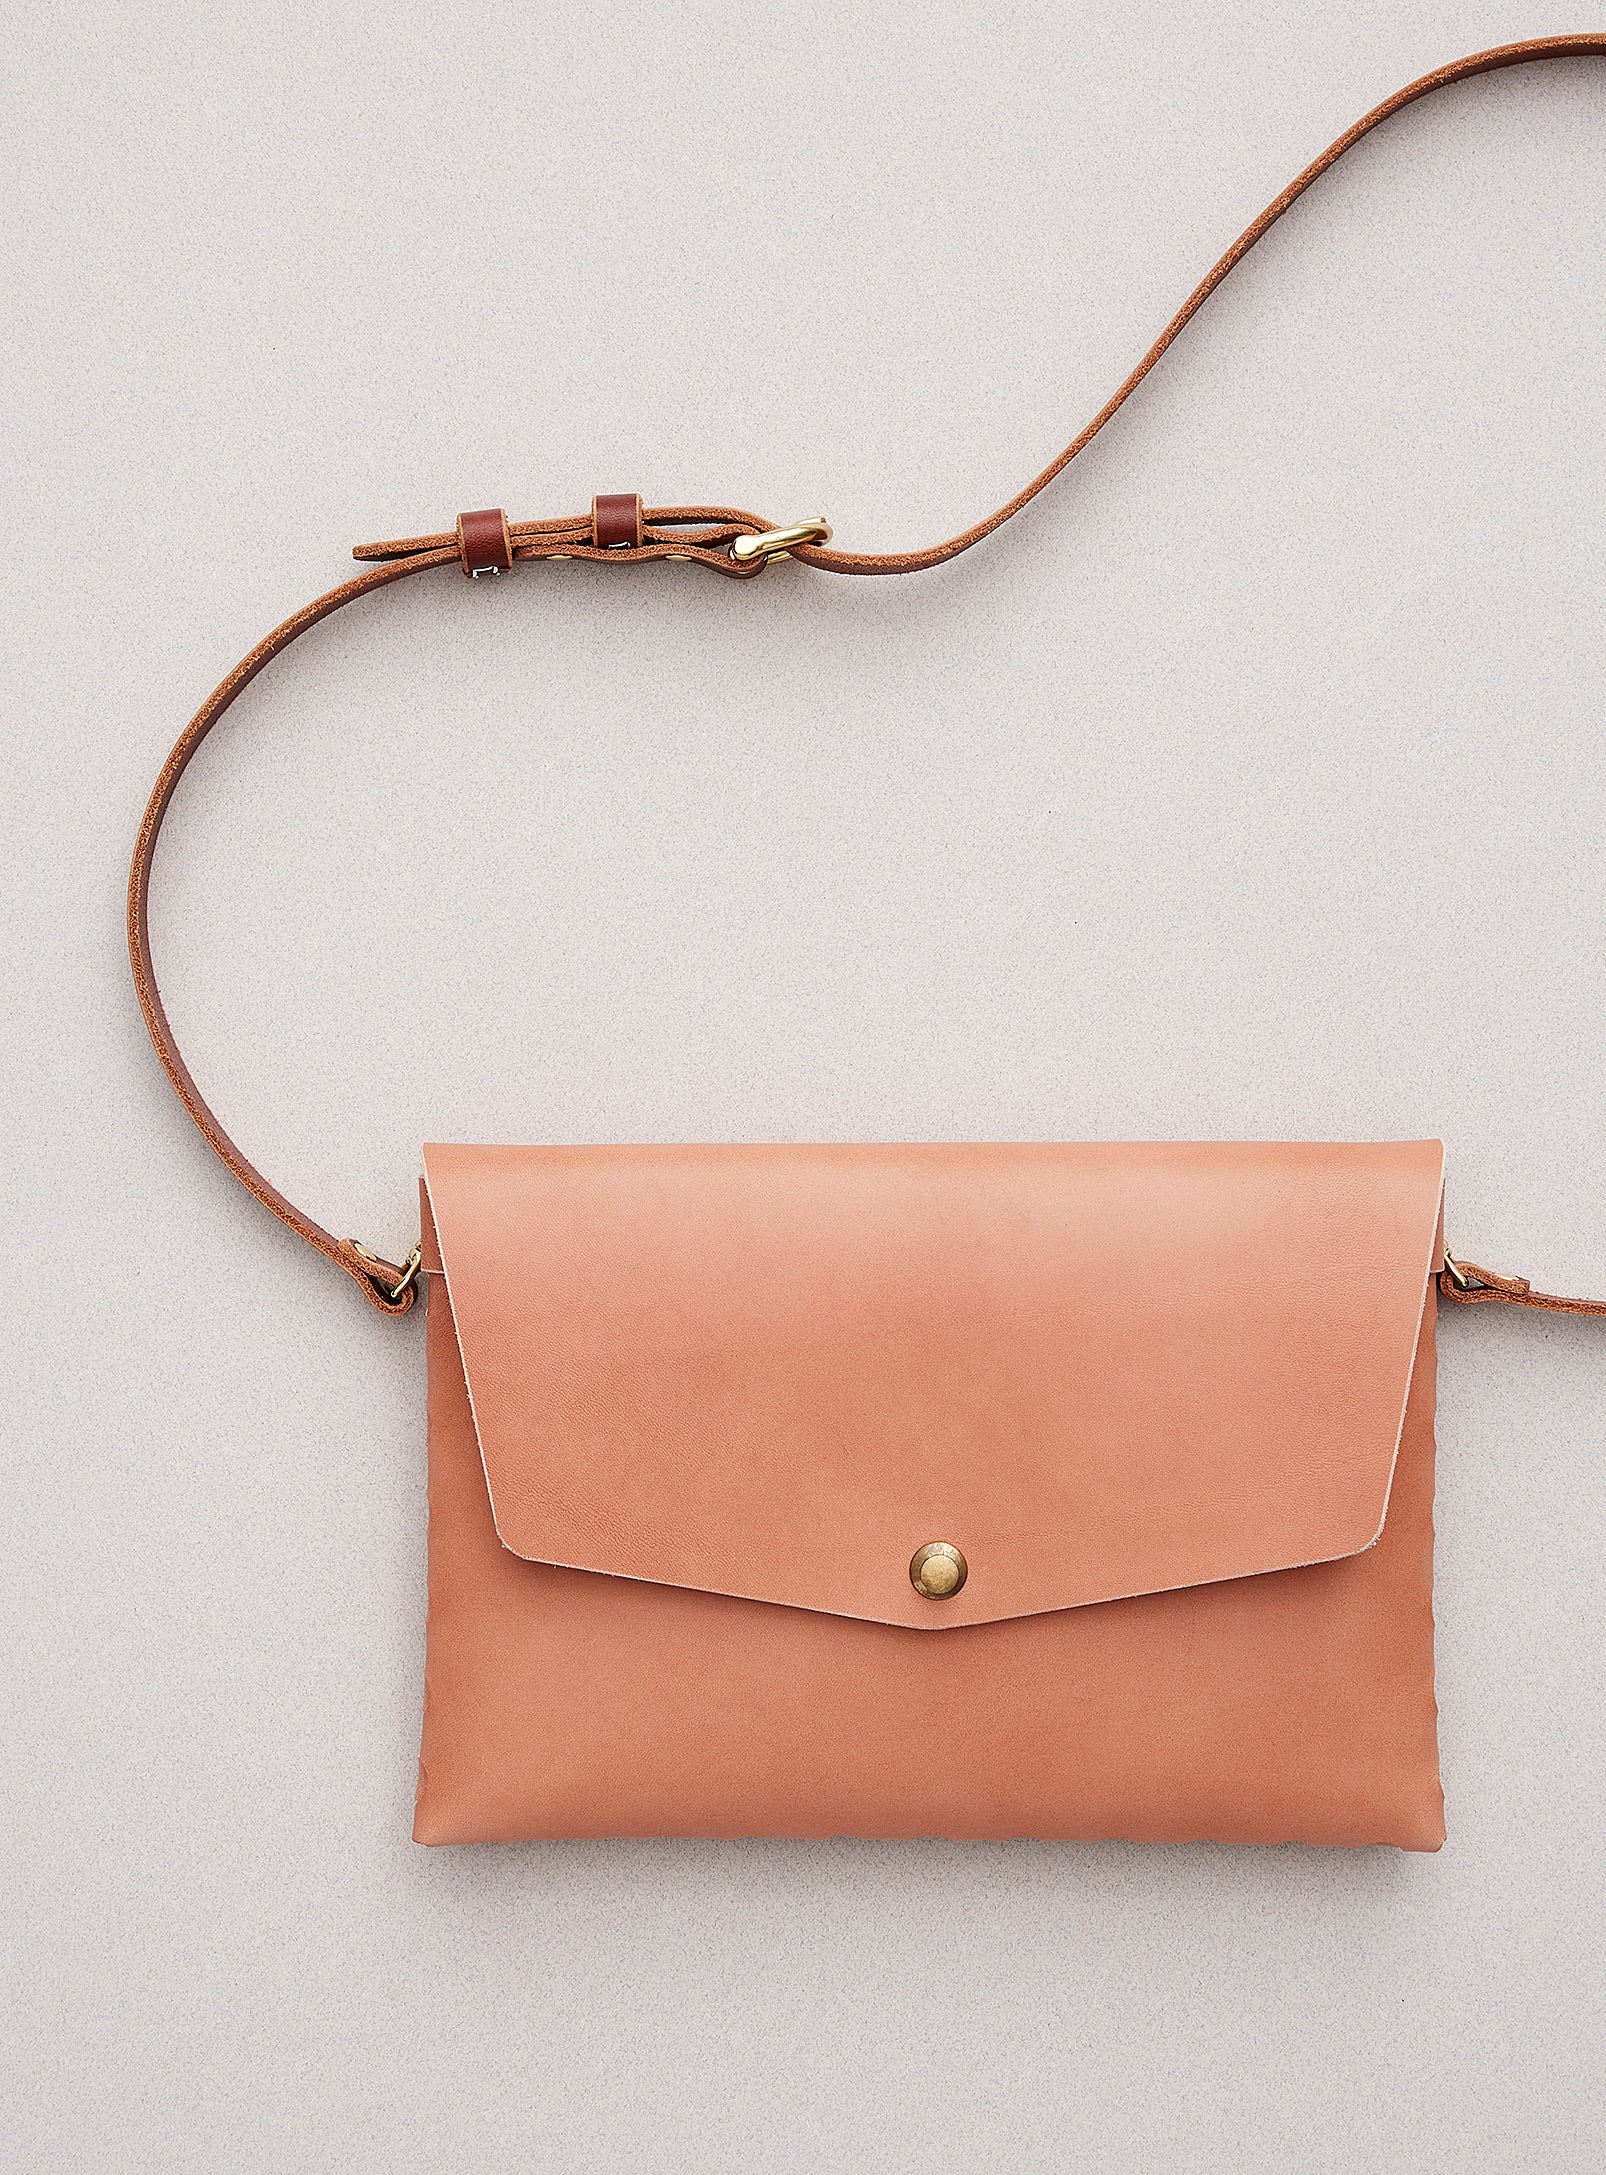 modjūl’s leather mini bag deluxe bag in pink. A larger take on the classic mini bag, a rectangular-shaped bag with long detachable straps, handcrafted in Canada using quality Italian leather and brass hardware.